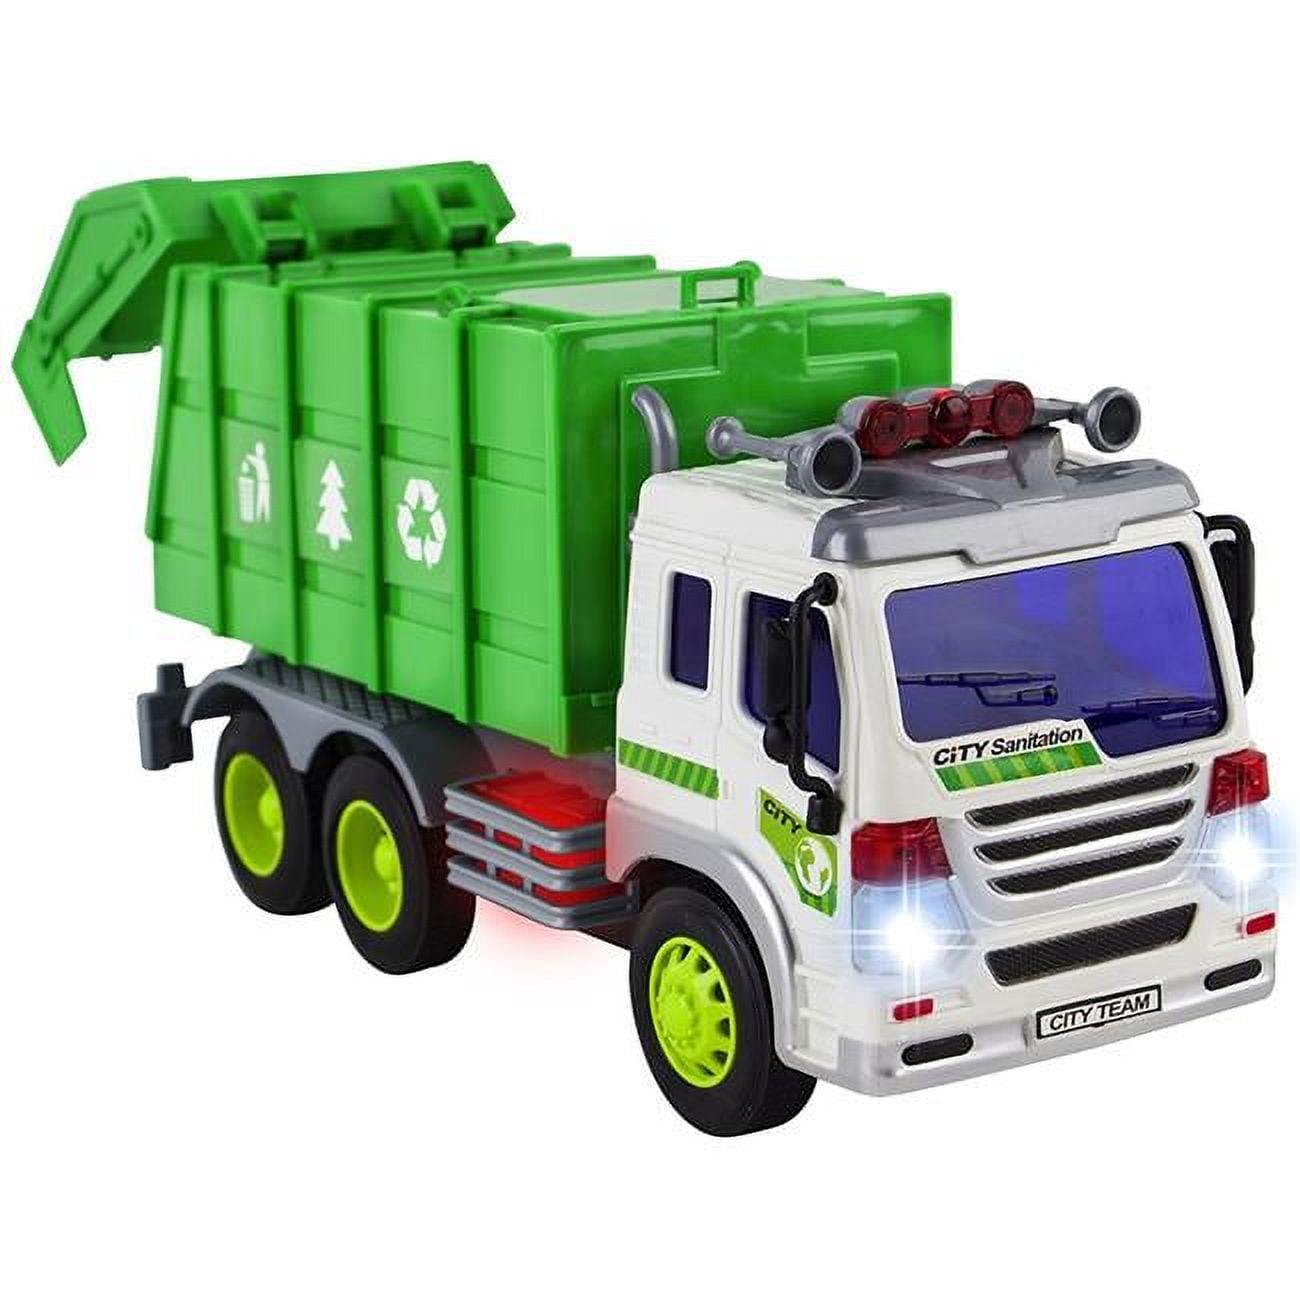 Ps307s Friction Powered Garbage Truck Toy